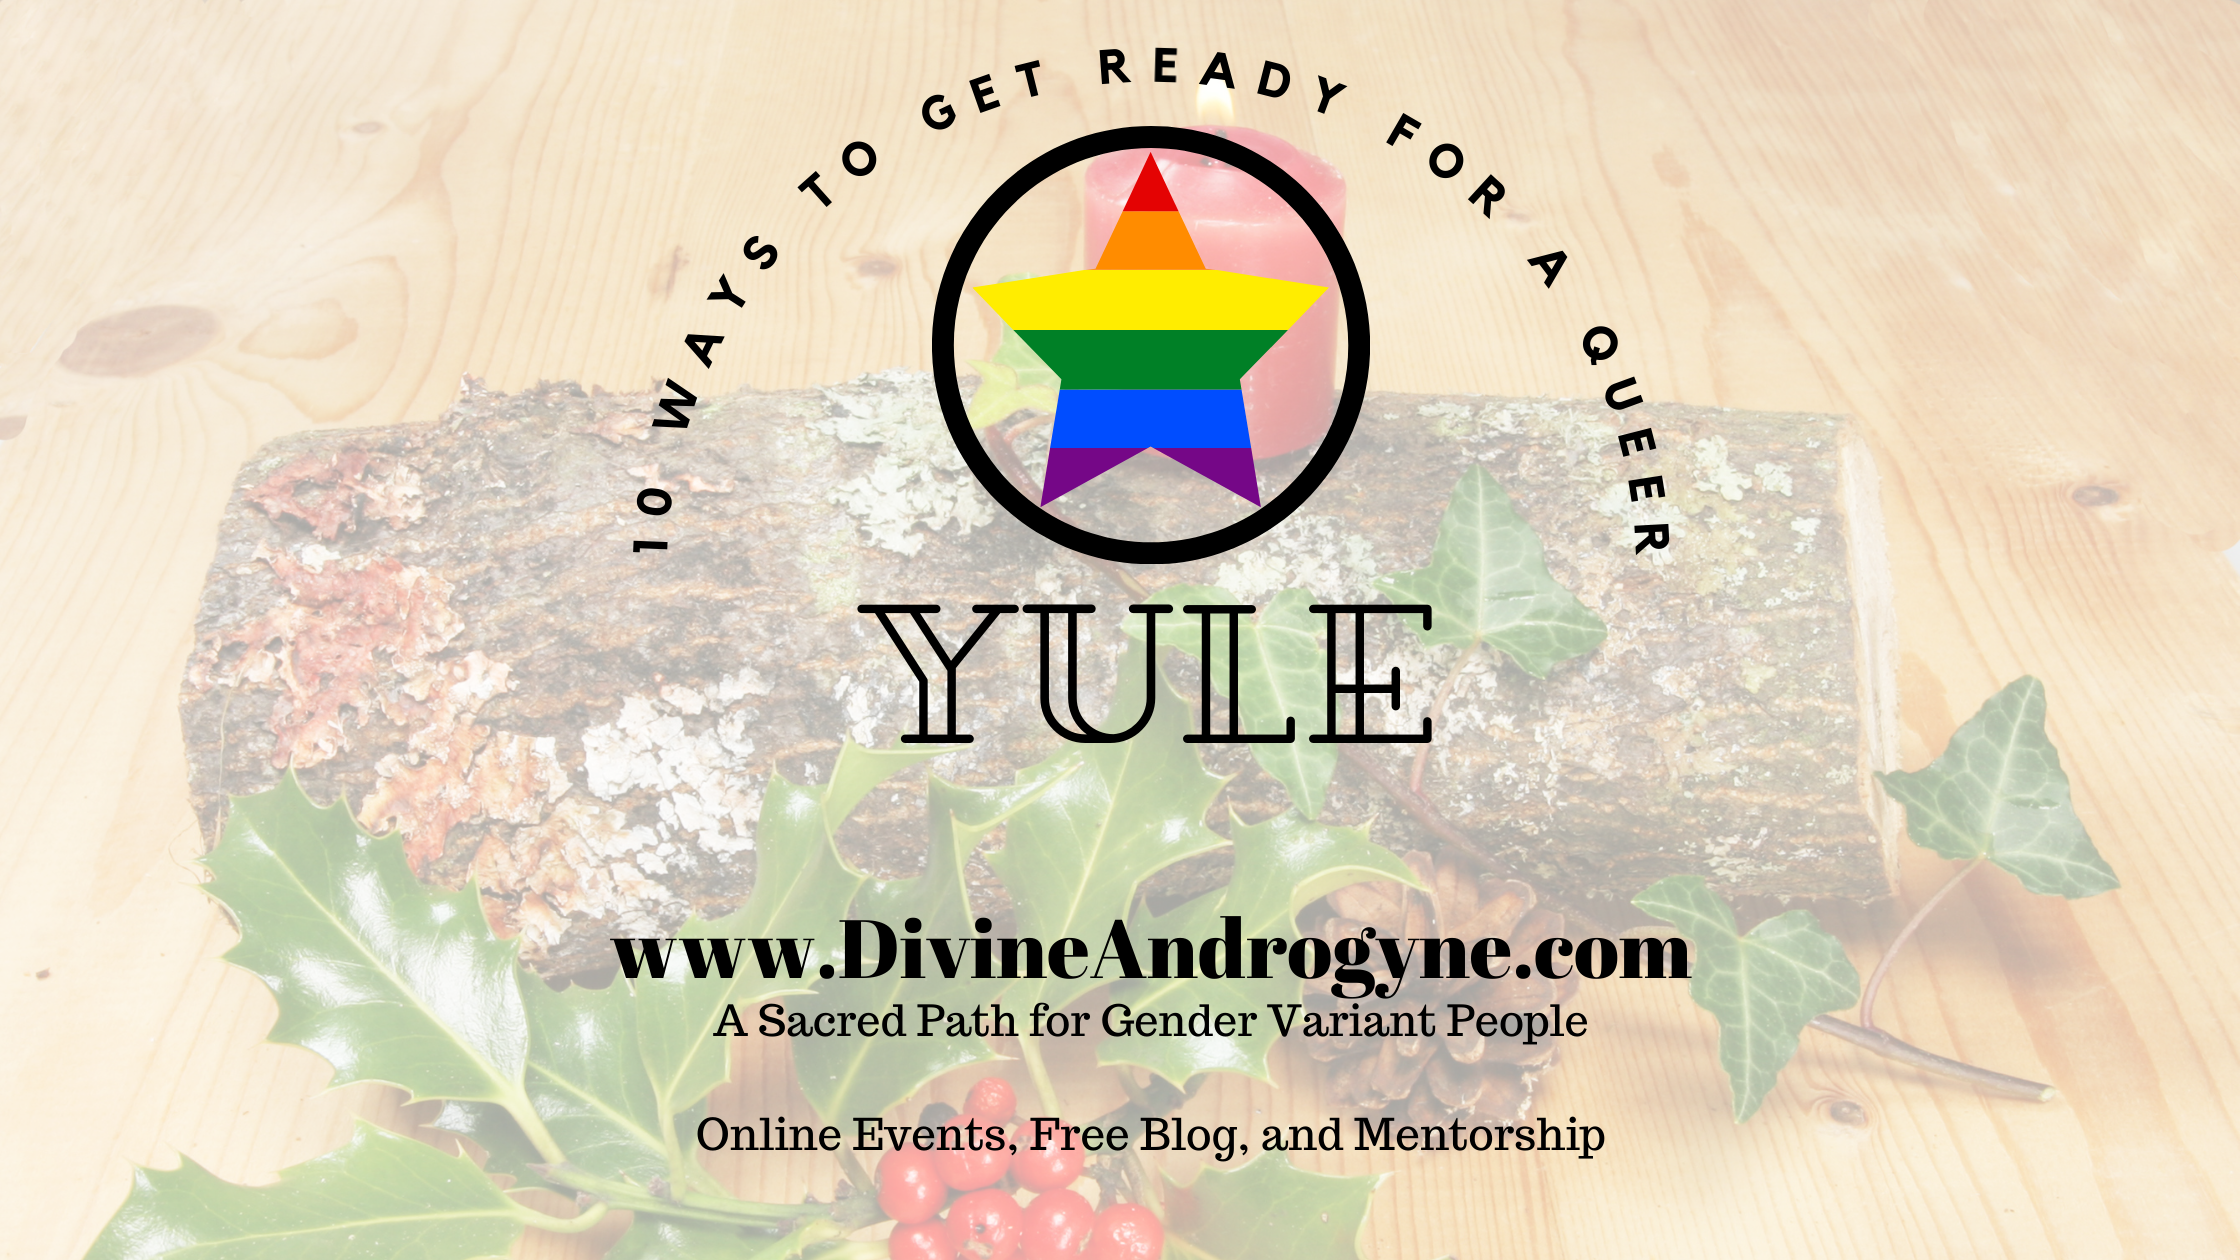 10 ways to get ready for a Queer Yule